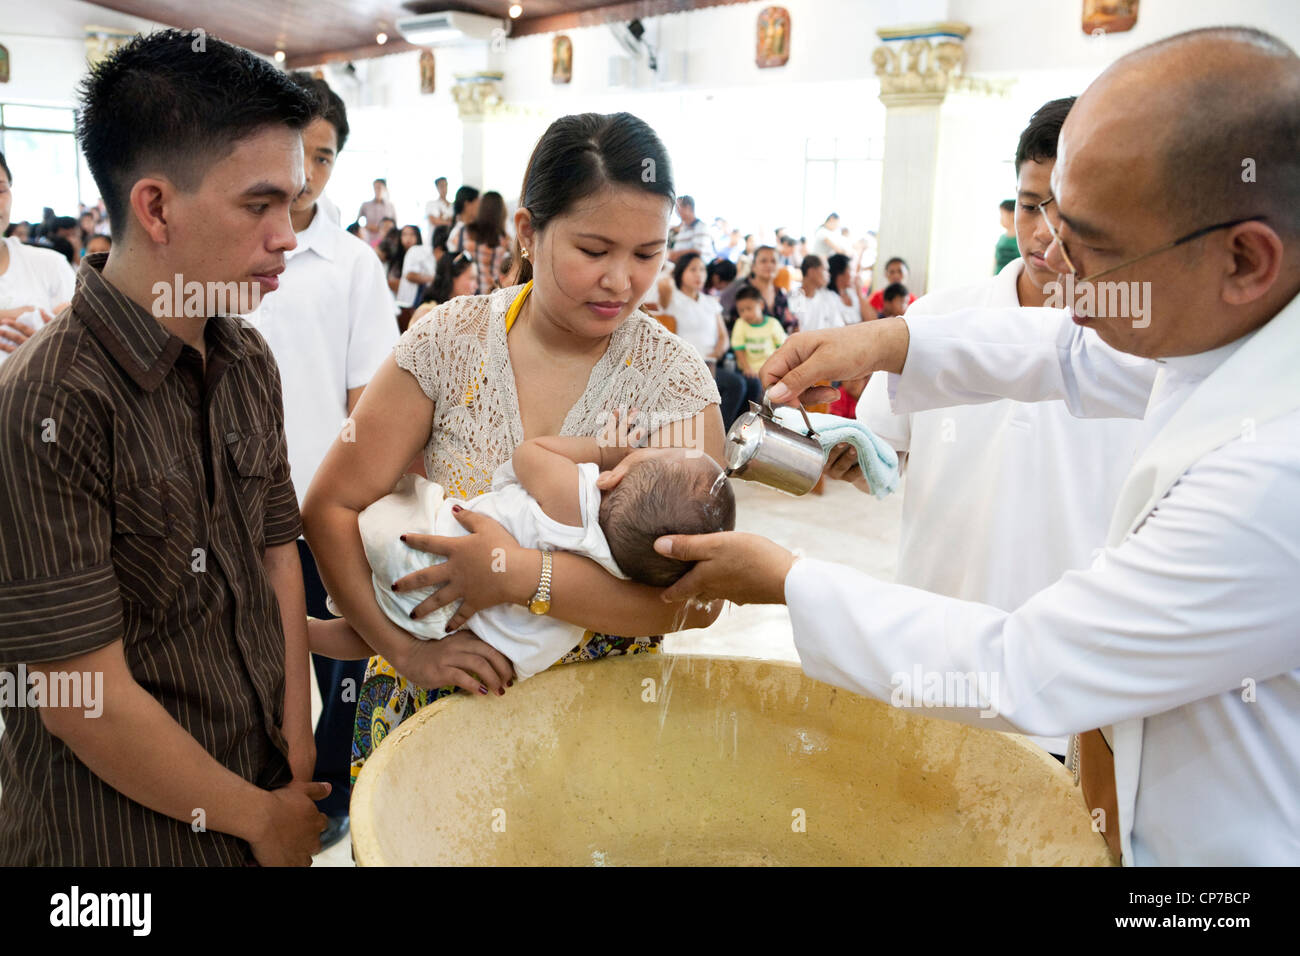 Lapu-Lapu City, Philippines, 26/02/2012: 200-300 babies being baptised in a single 3 hour ceremony at Mactan Air Base Chapel. Stock Photo